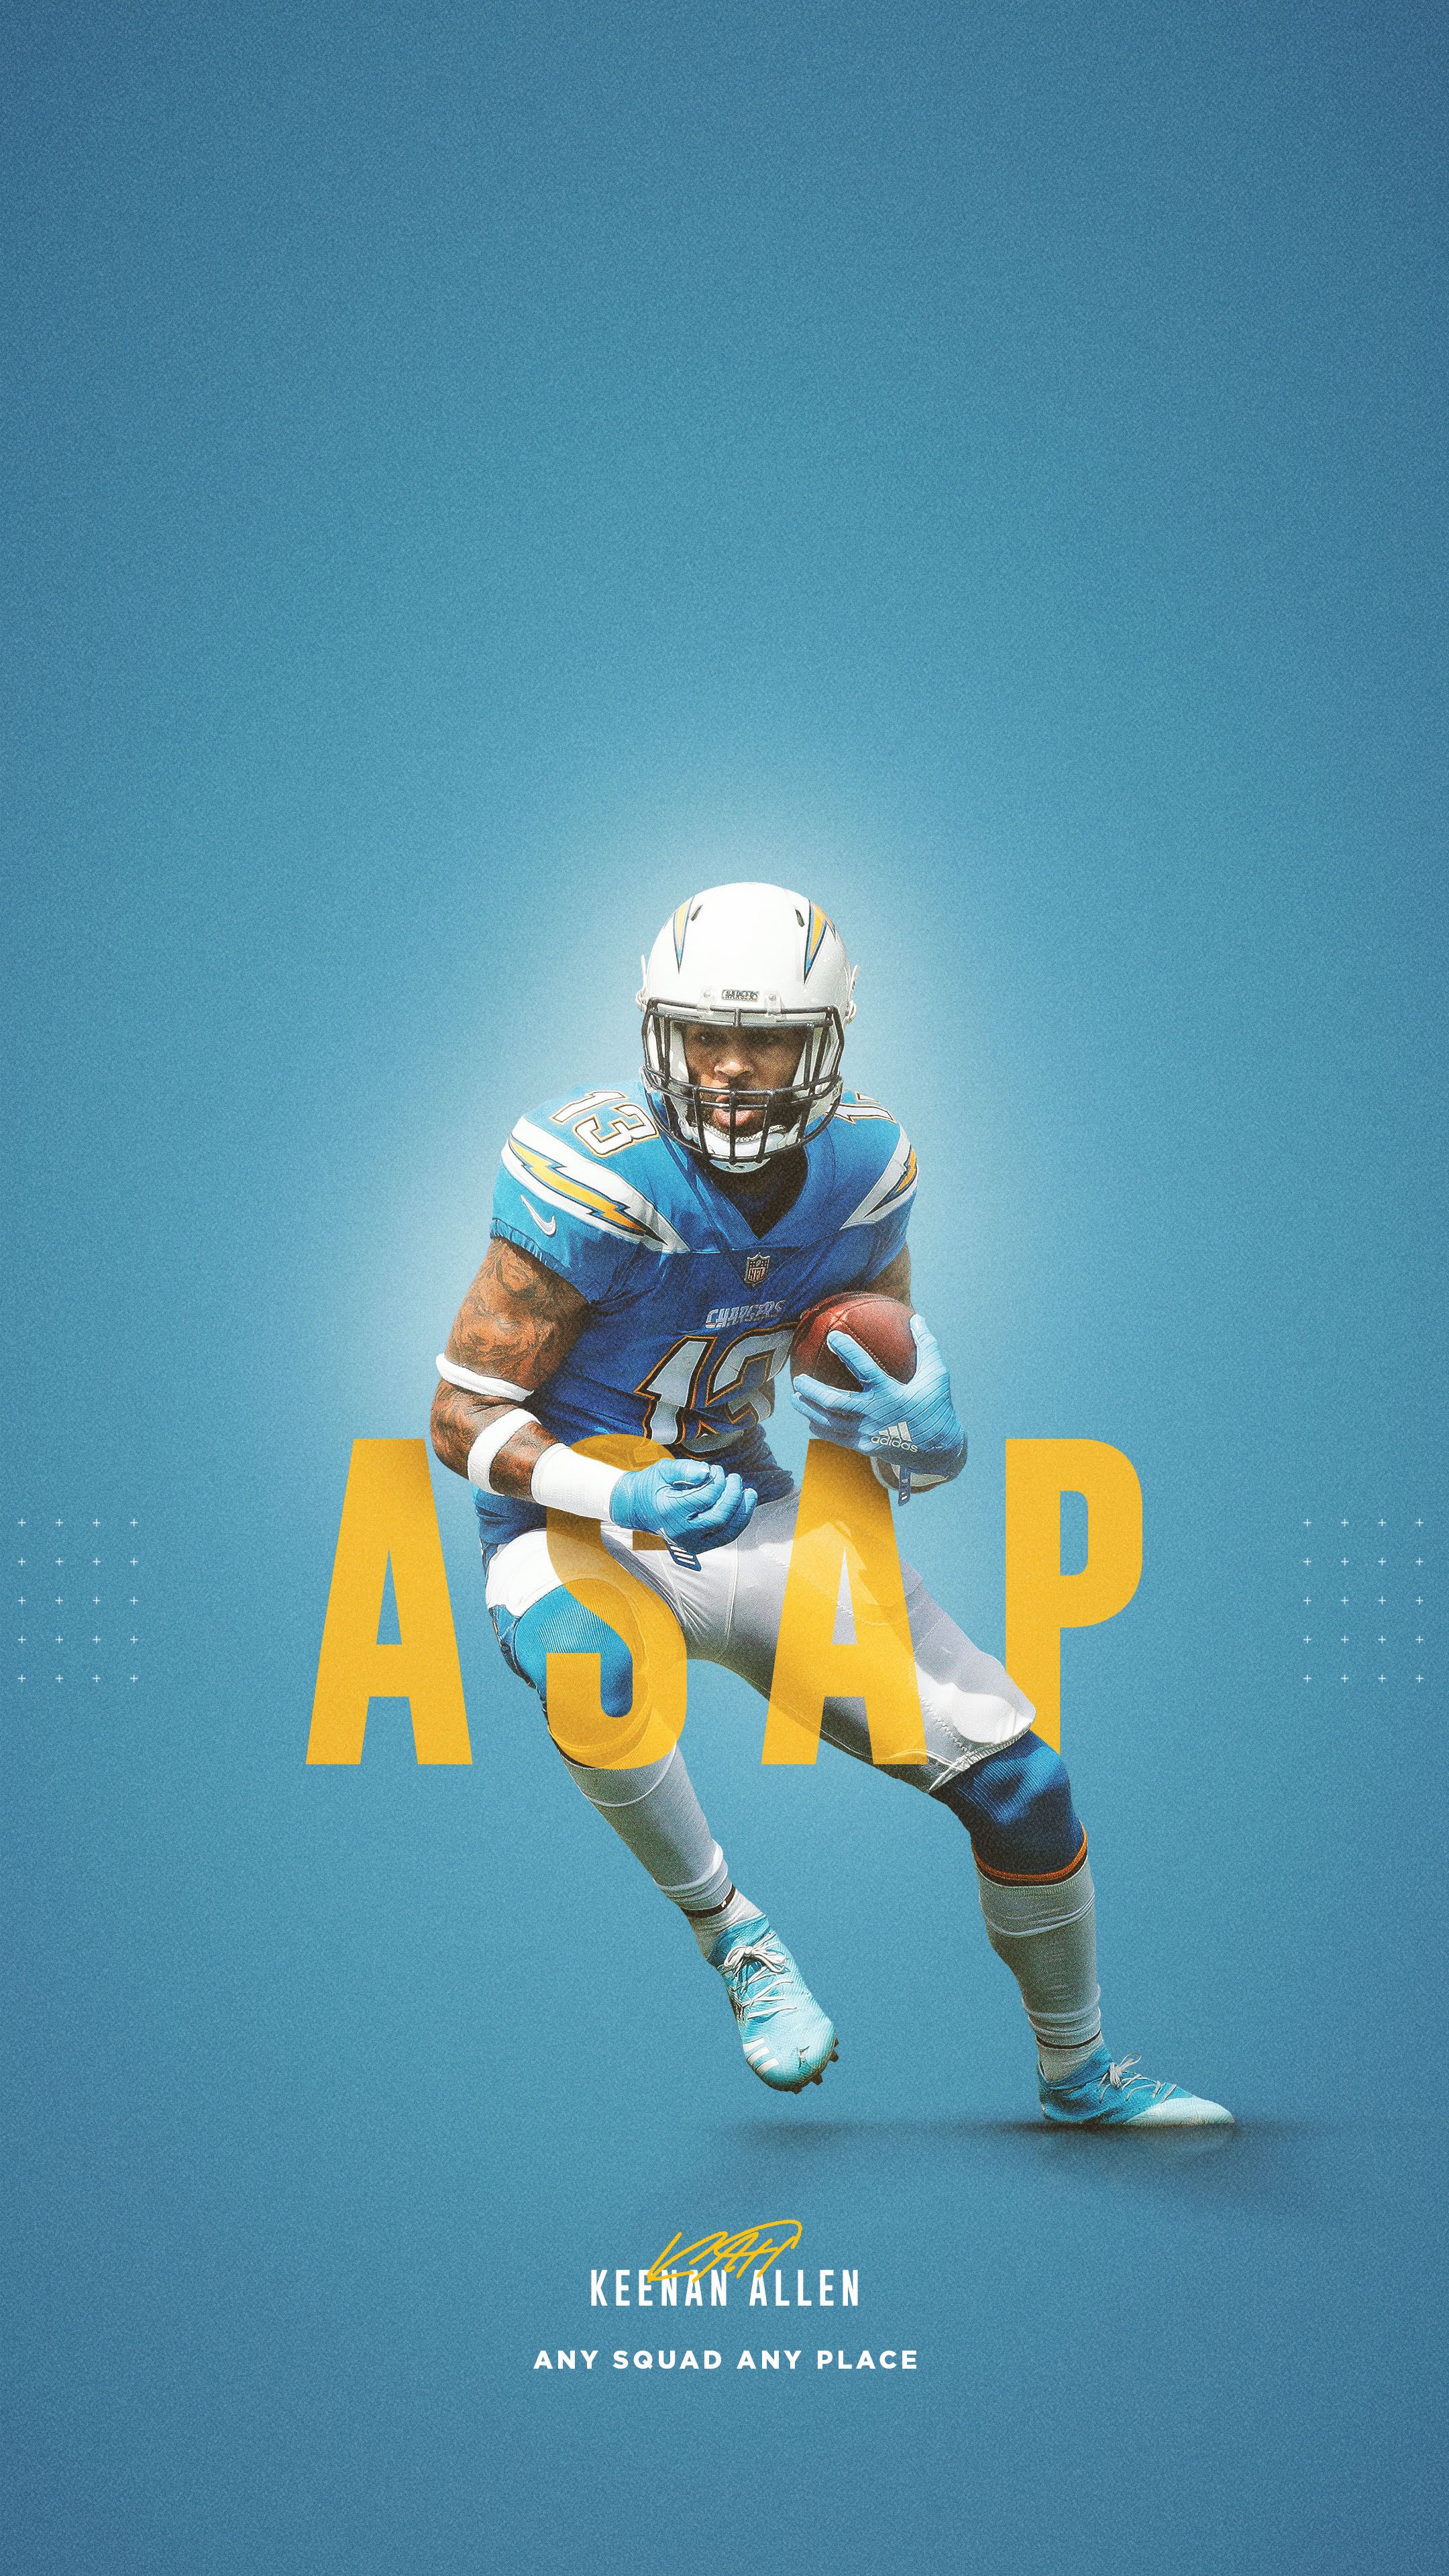 Chargers Wallpapers  Los Angeles Chargers  chargerscom  Nfl football  wallpaper Football artwork Nfl football art